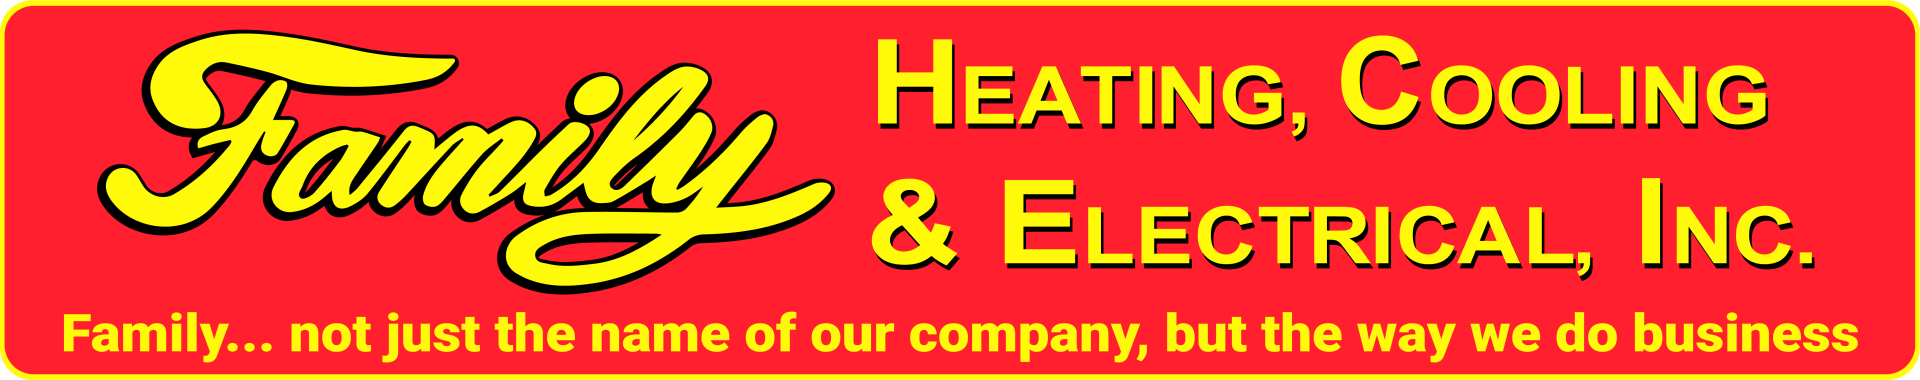 Family Heating, Cooling, & Electrical, Inc